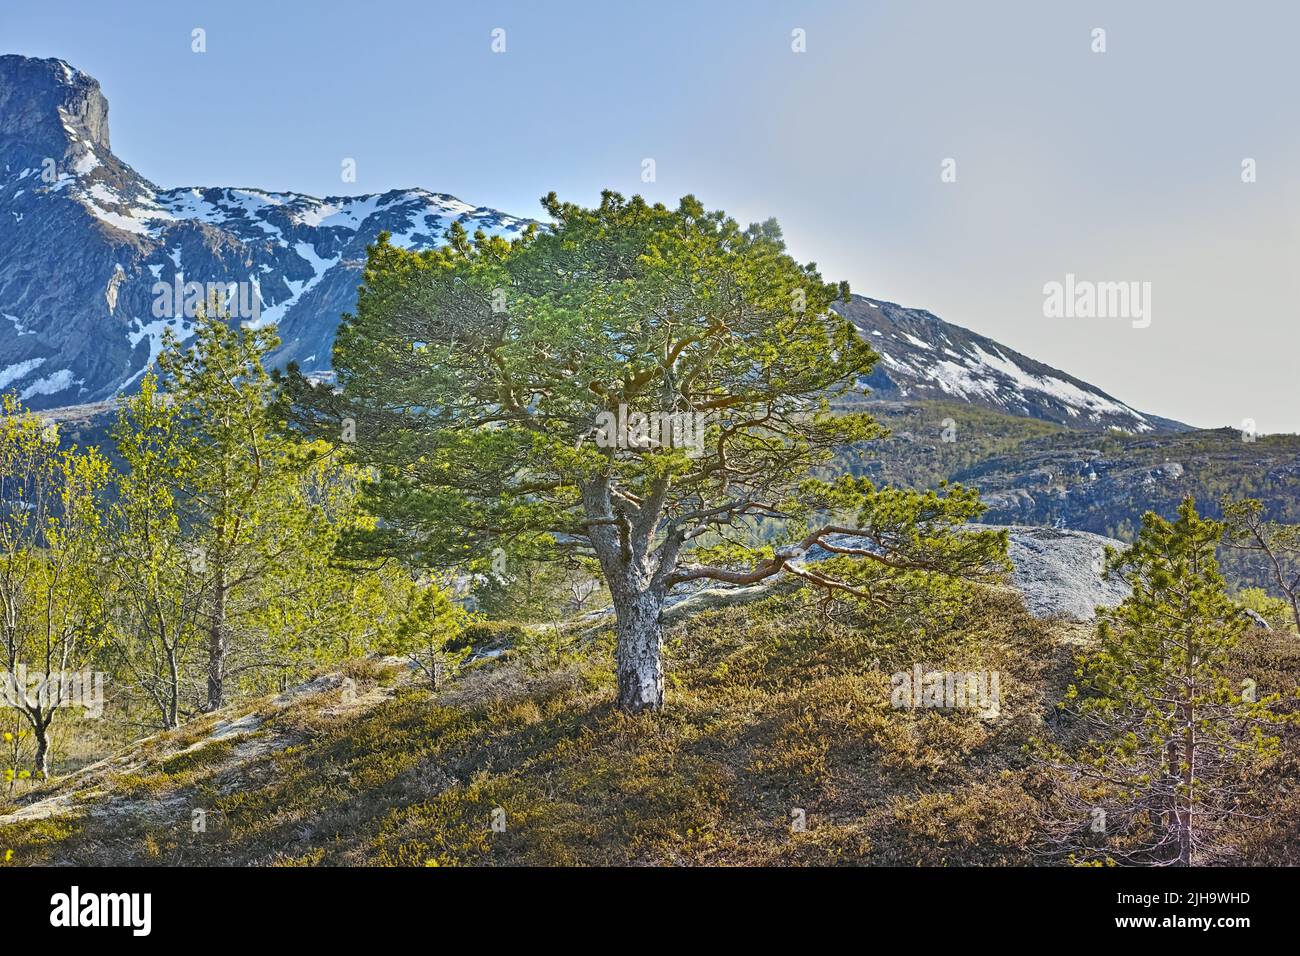 Forest trees by the mountains with melting snow in early Spring on a blue sky with copy space. Landscape of a big tree with lush green leaves Stock Photo